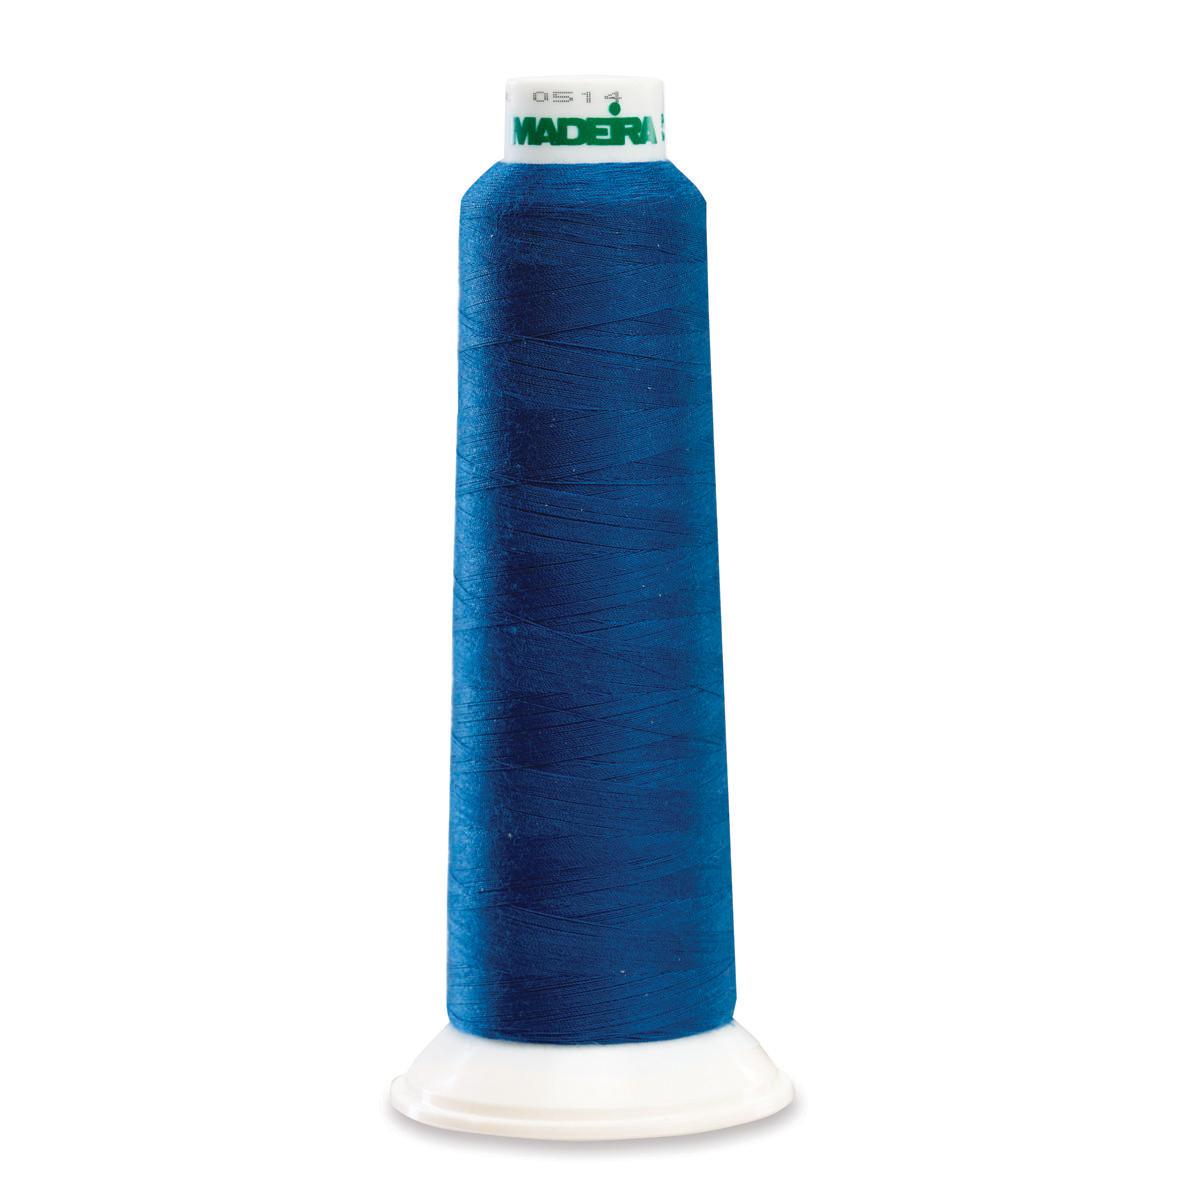 Madeira Serger Thread - 8960 Chicory - 2000yd Poly